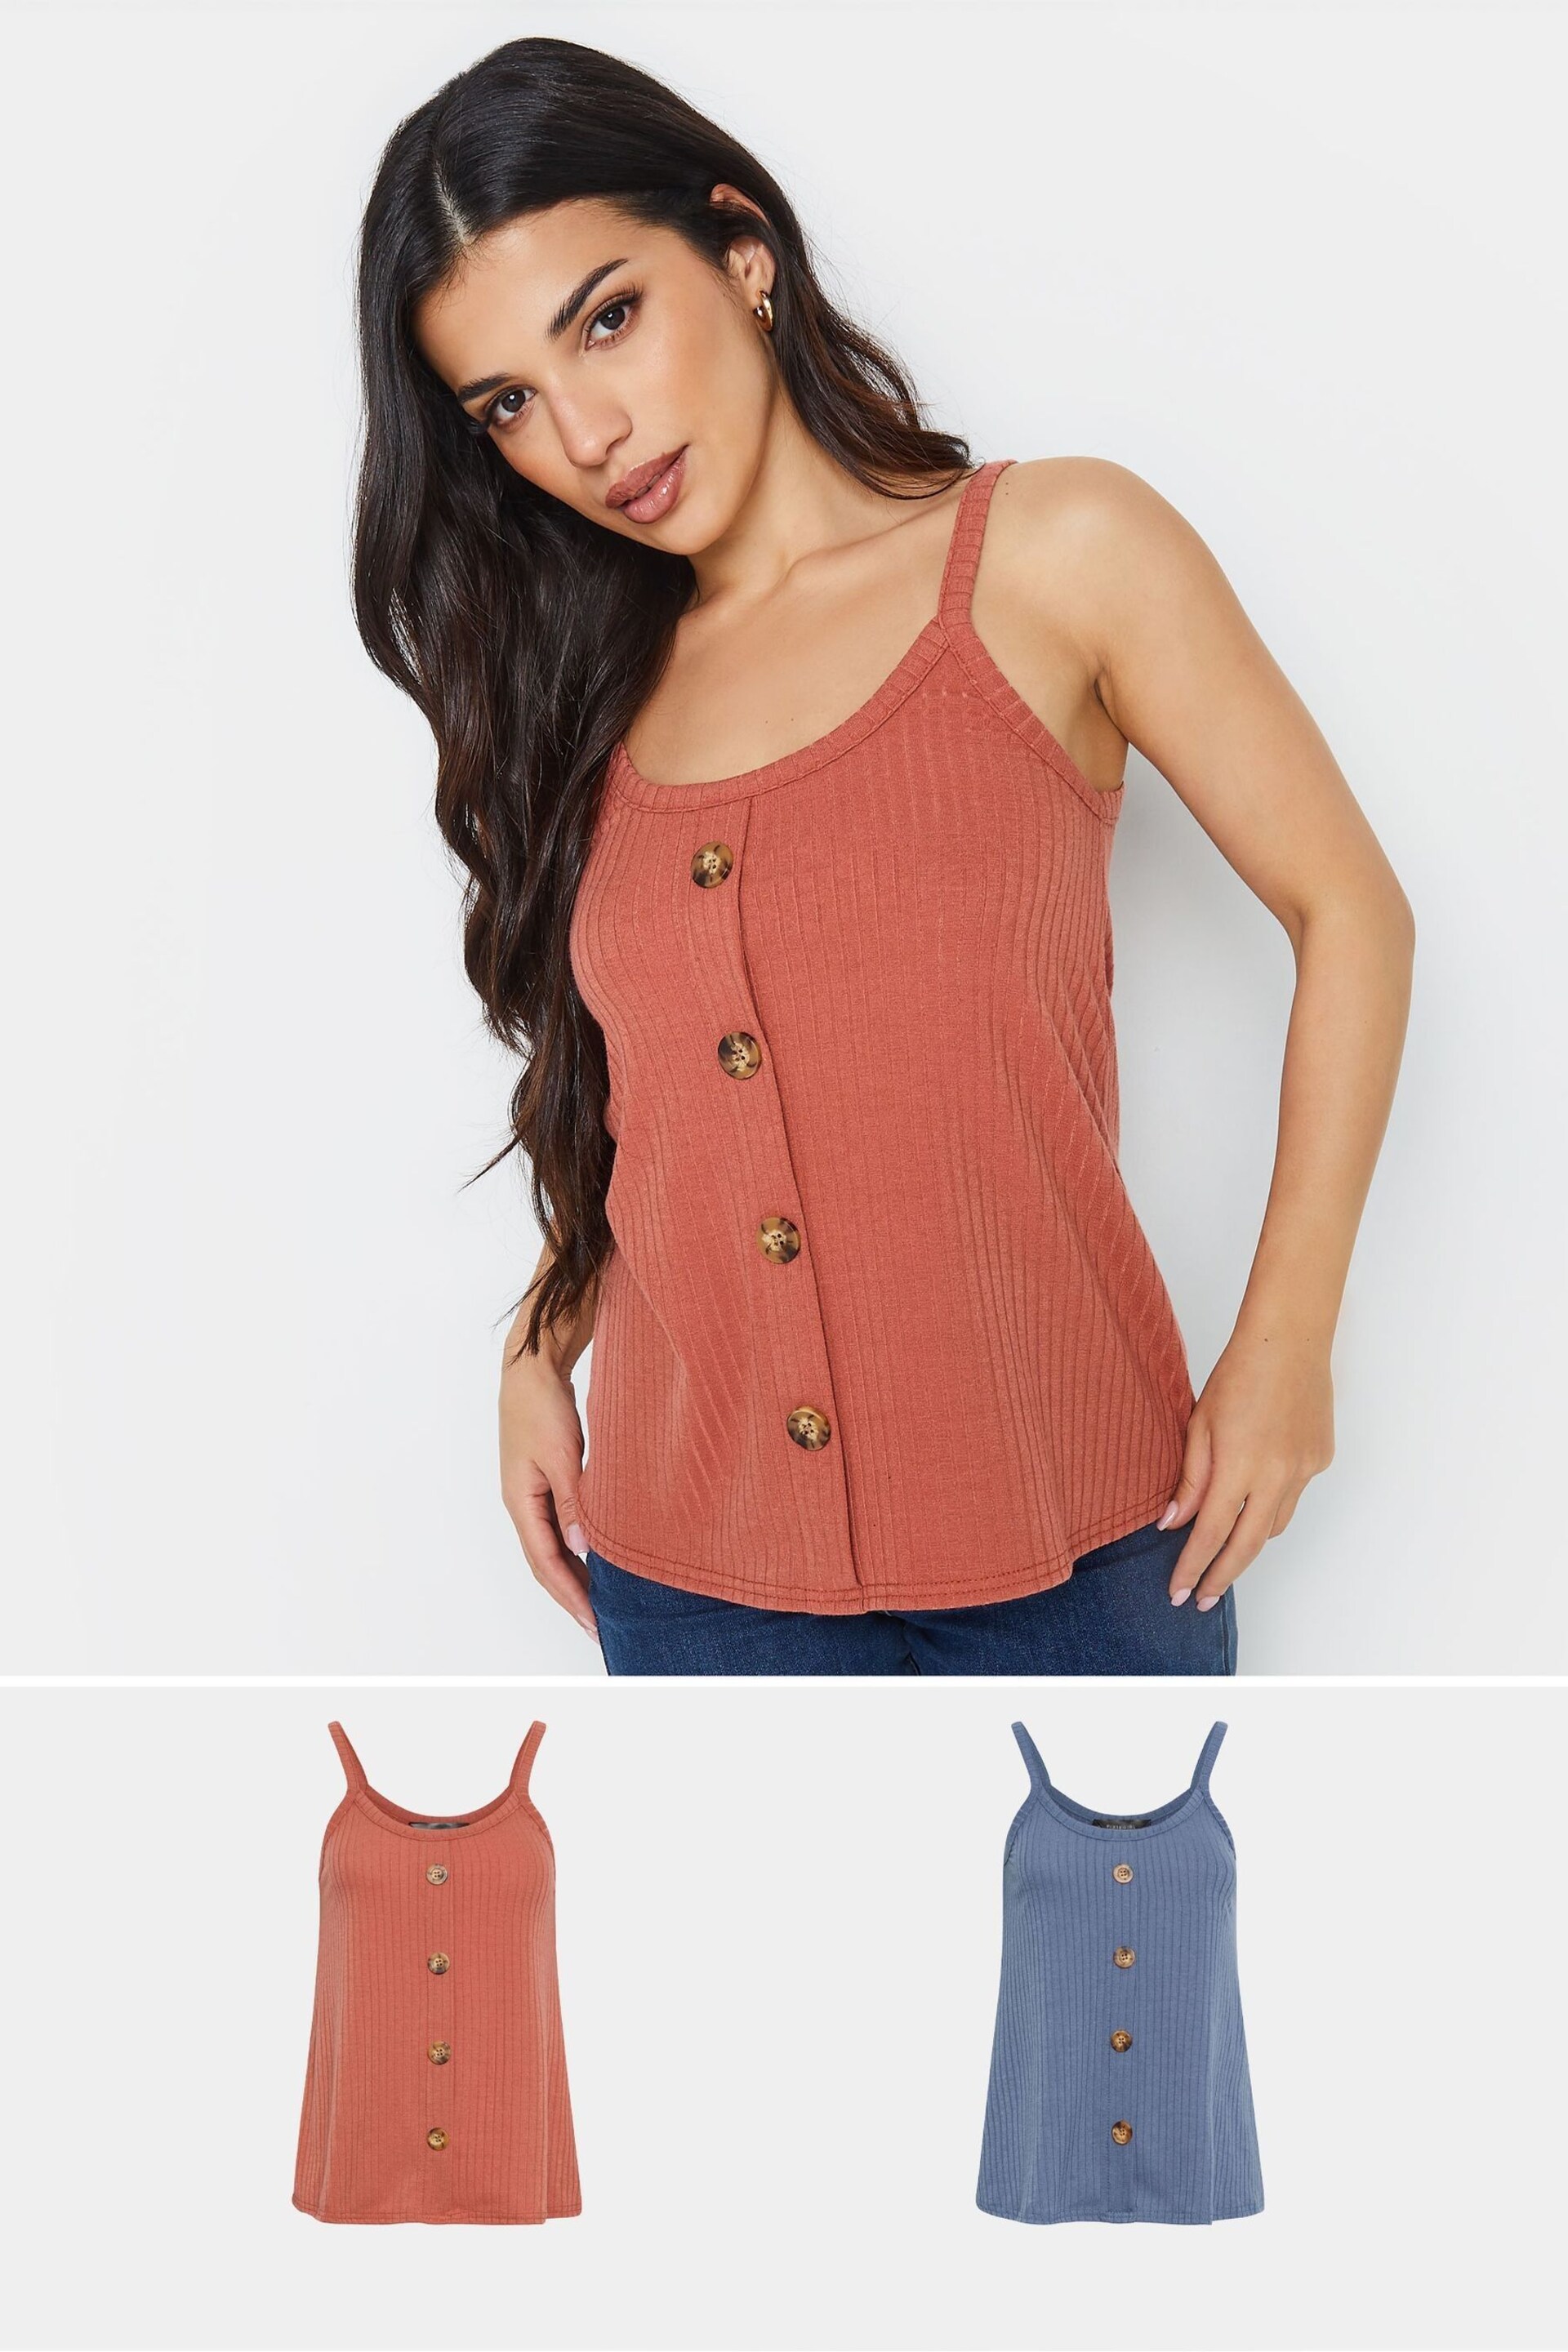 PixieGirl Petite Red Button Down Cami Tops 2 Pack - Image 1 of 6